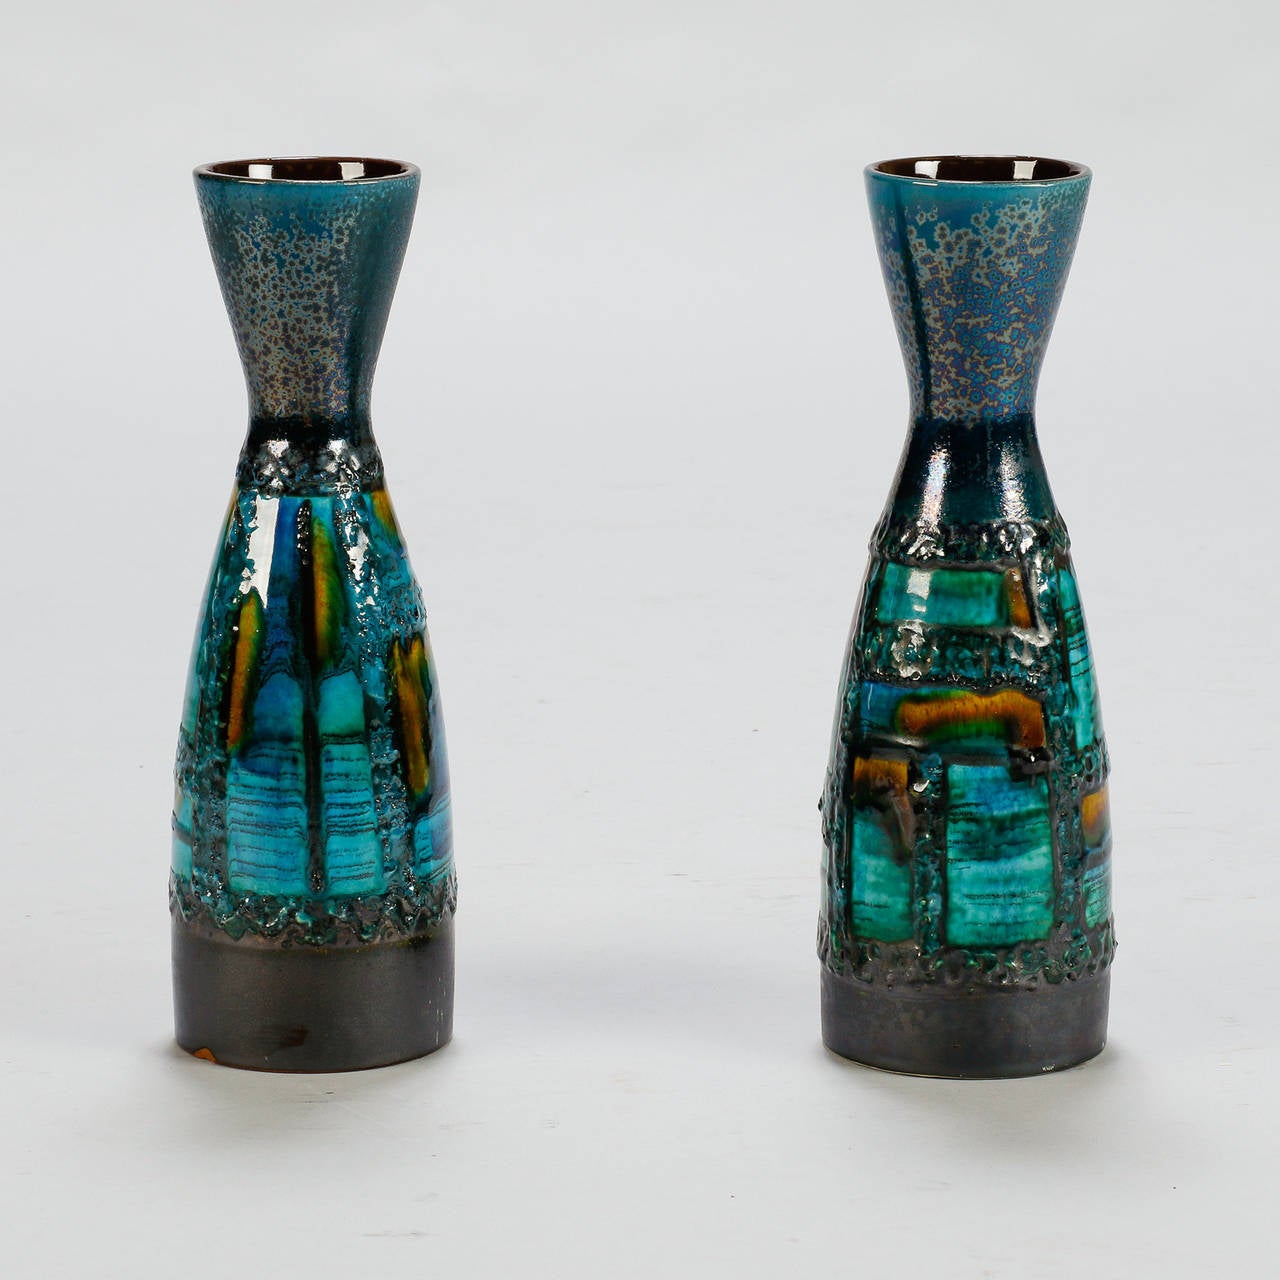 Glazed Pair of Mid Century Carstens of Germany Vases in Blue, Green and Gold Glaze